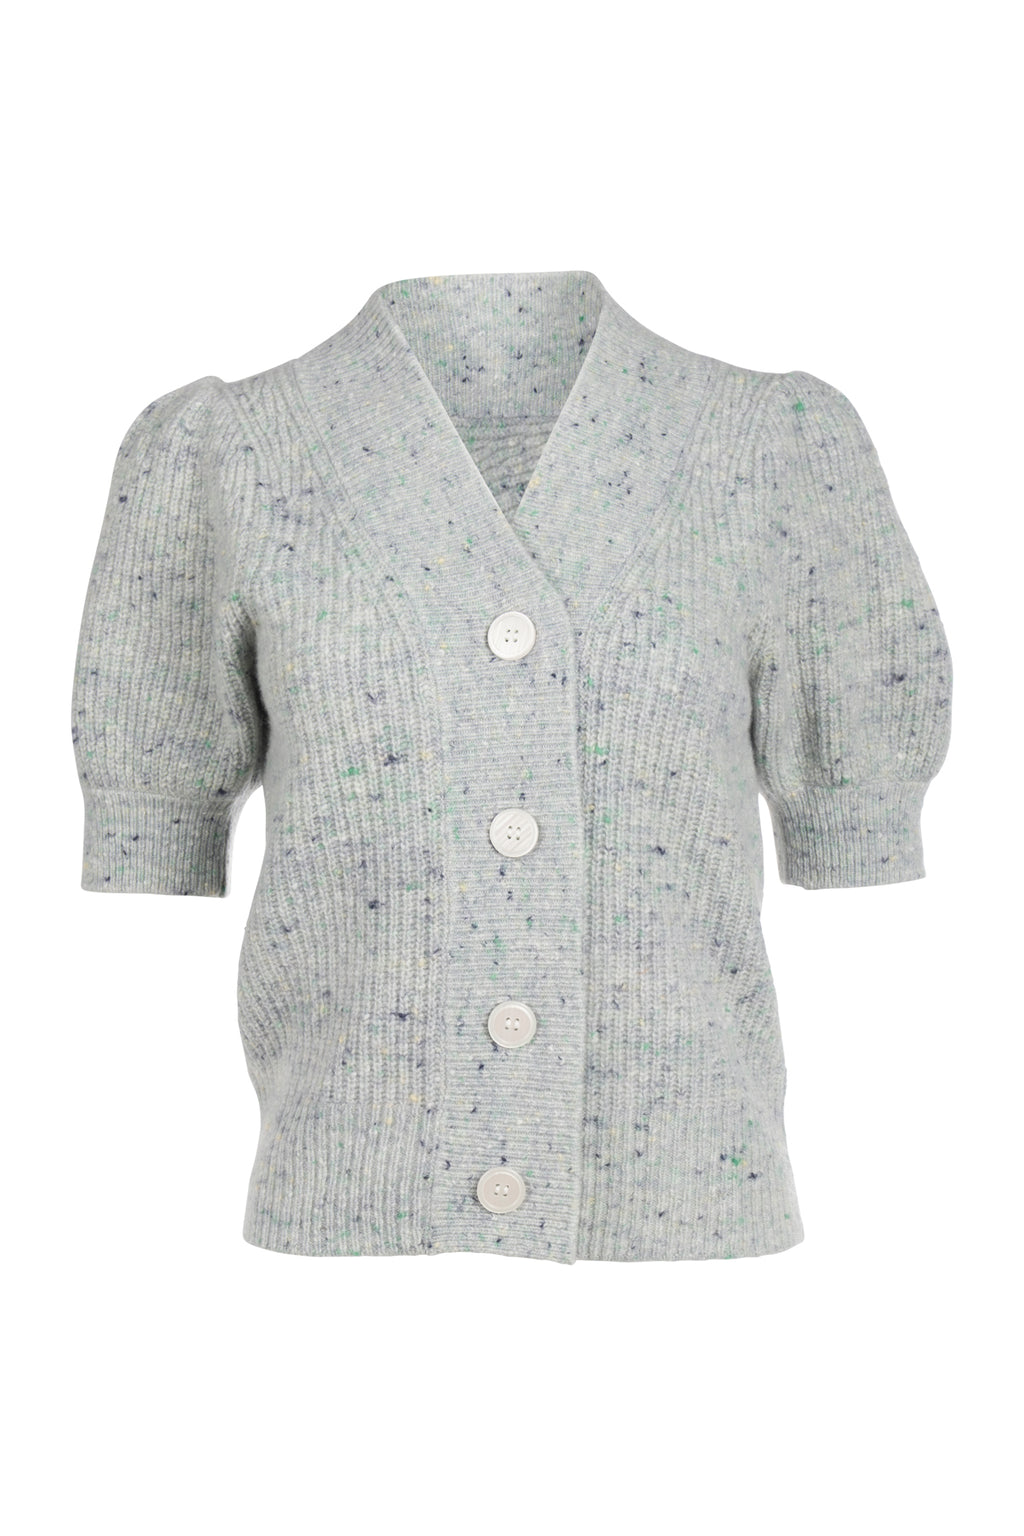 Cleo Cardigan - Flecked Lime Donegal